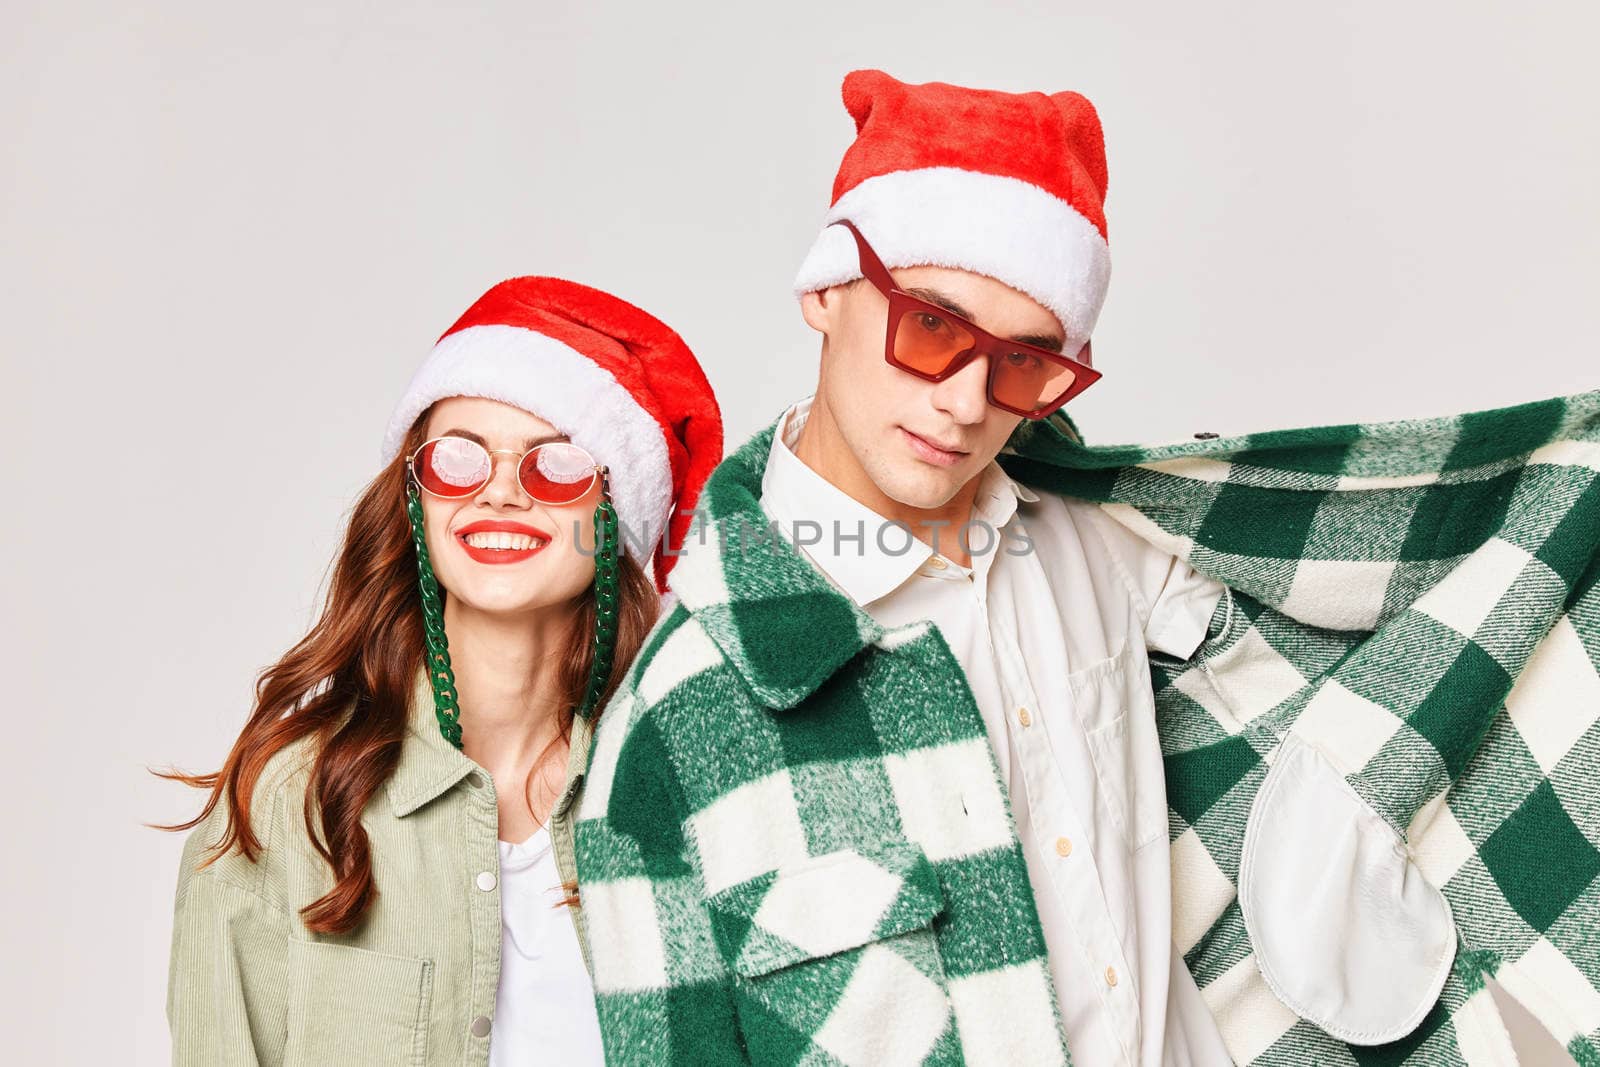 cheerful man and woman wearing sunglasses new year winter holiday friendship fun by SHOTPRIME